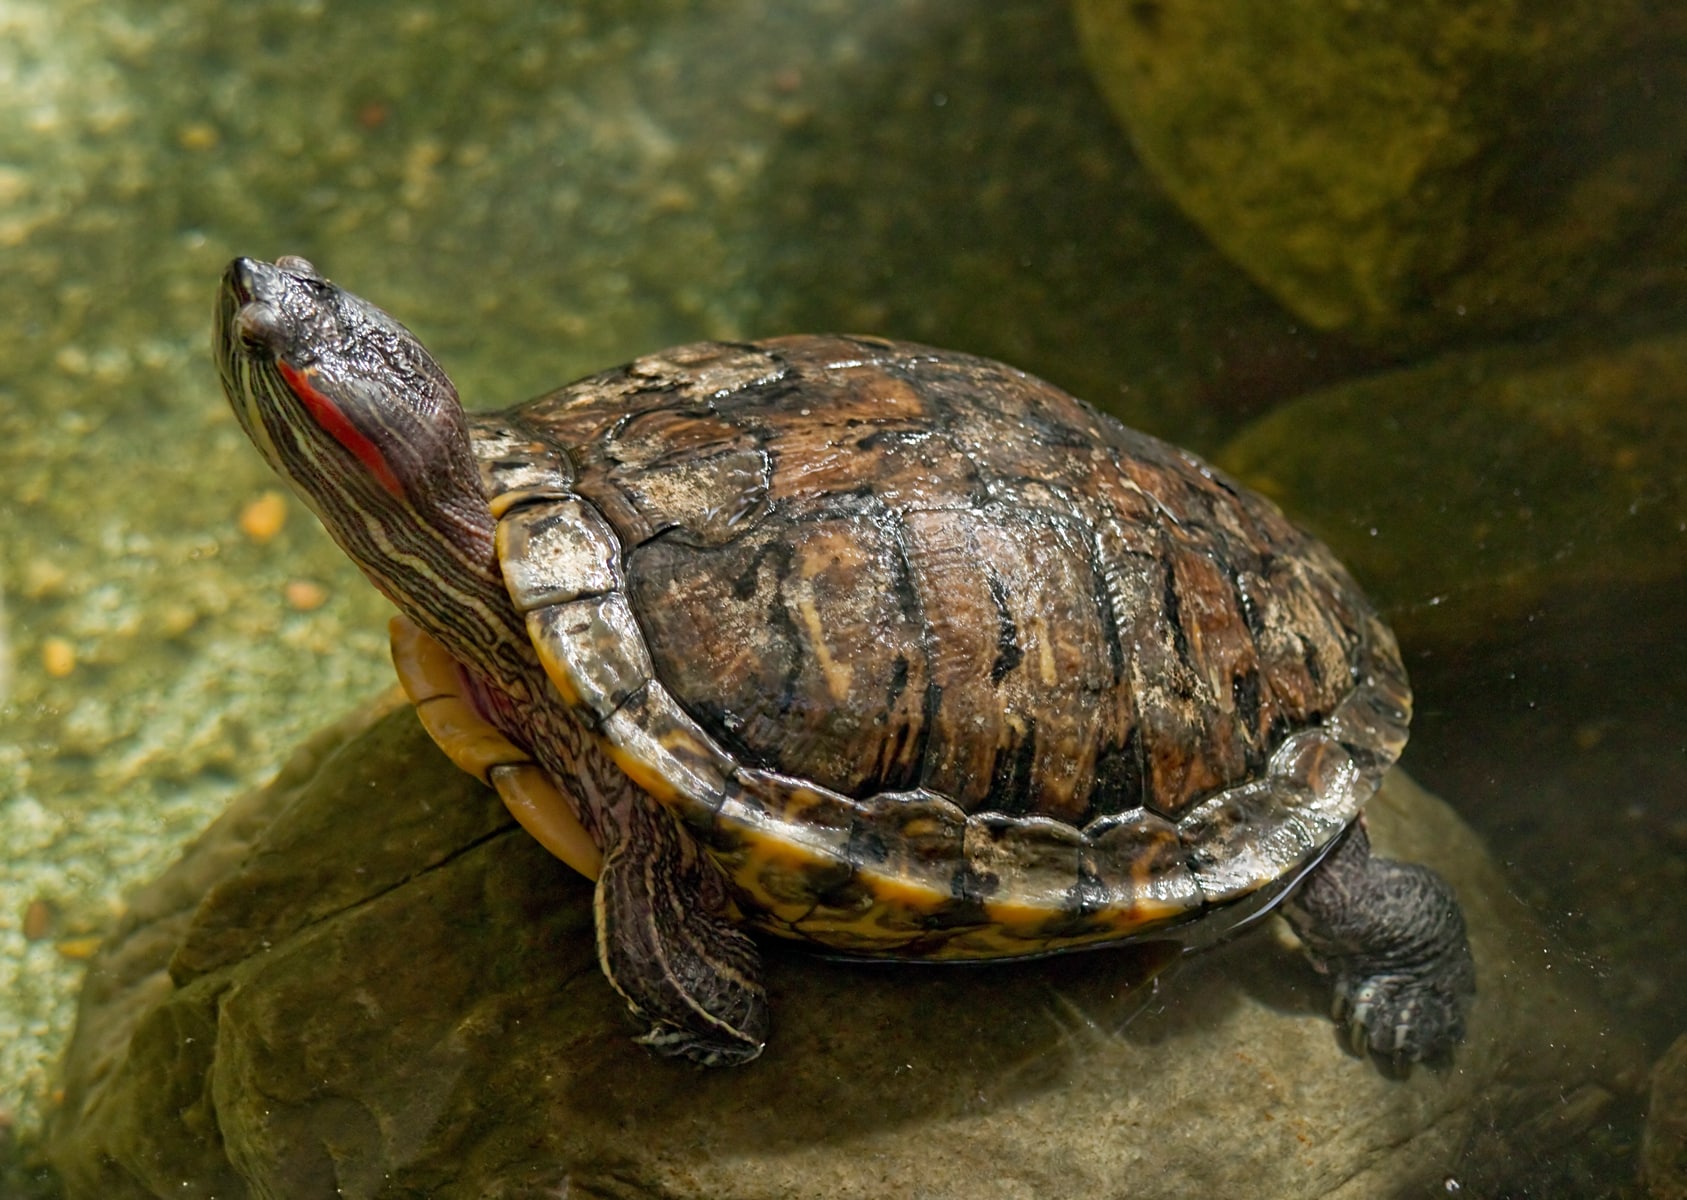 Why Are Red Eared Slider Turtles an Invasive Species?